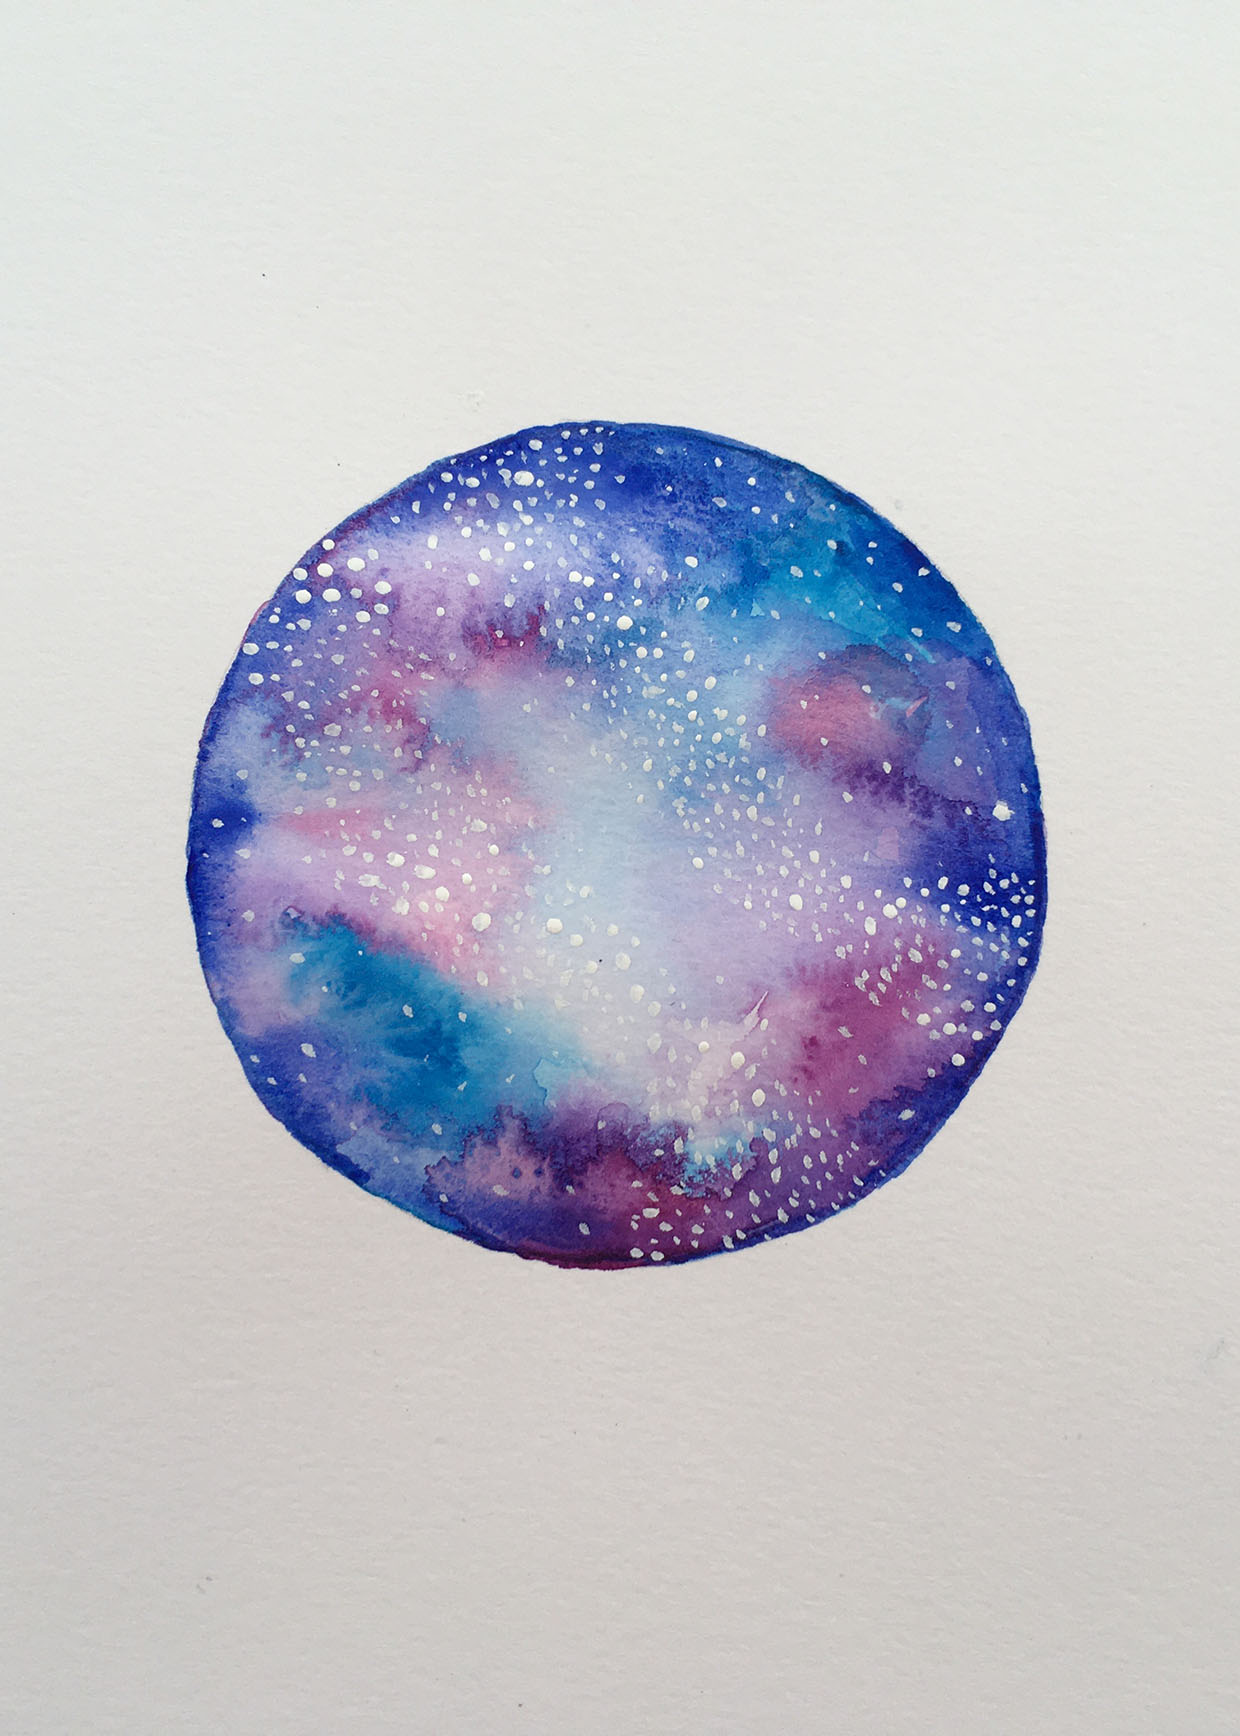 Unleash Your Creativity with Galaxy Watercolor Painting缩略图